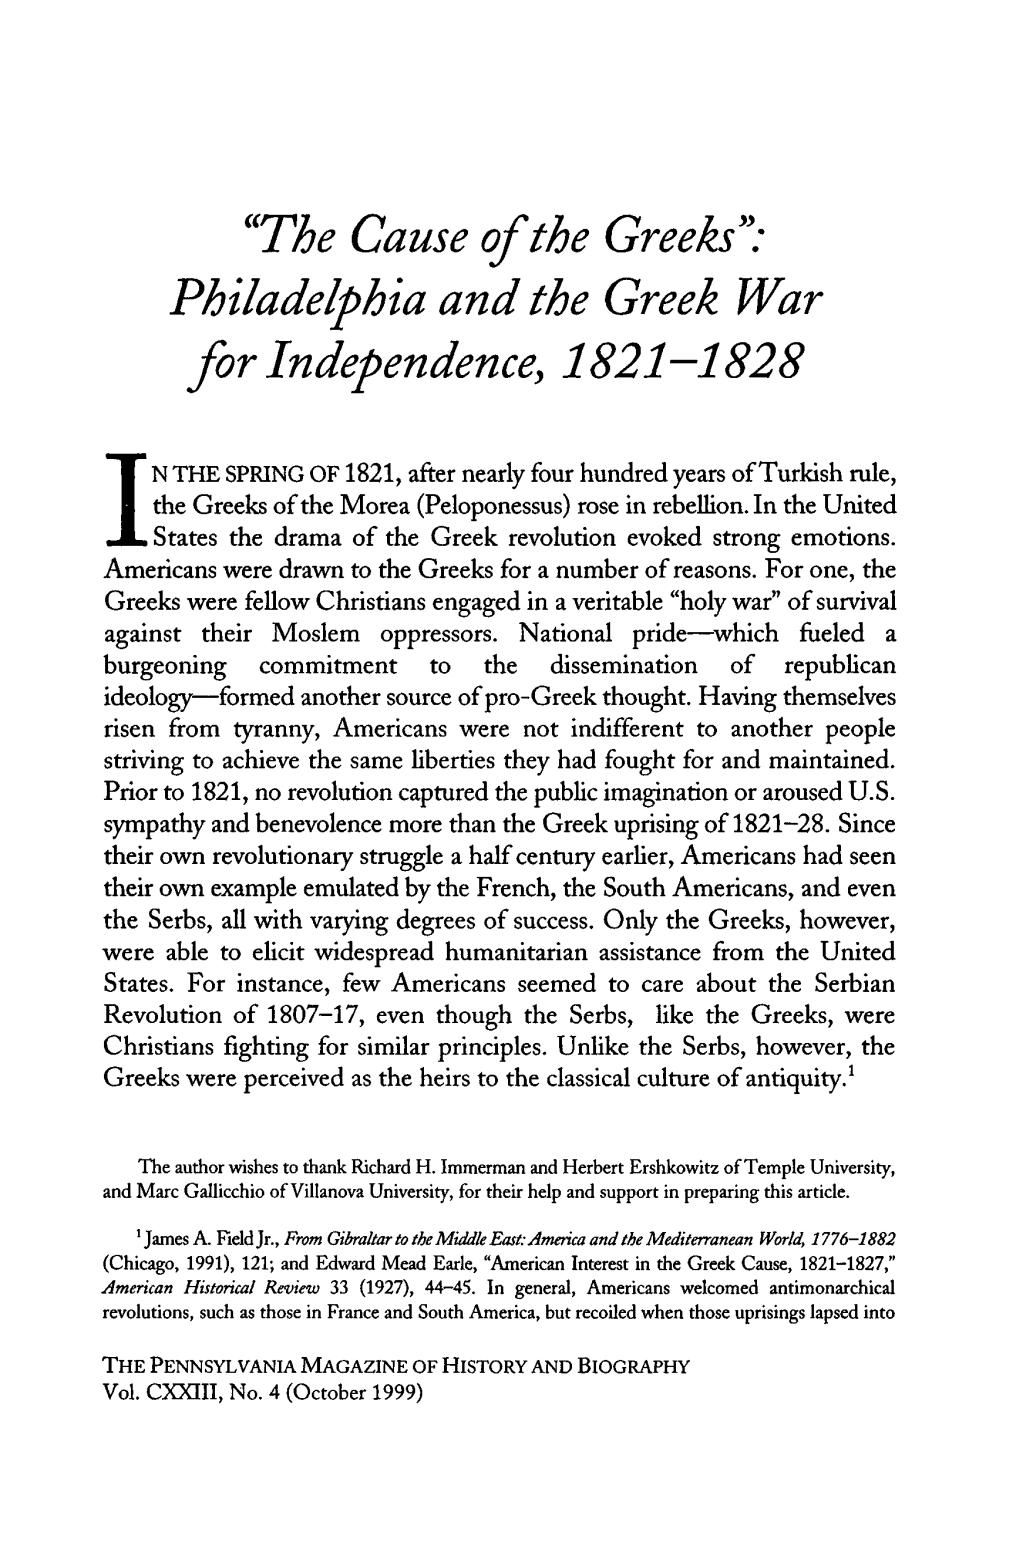 Philadelphia and the Greek War for Independence, 1821—1828